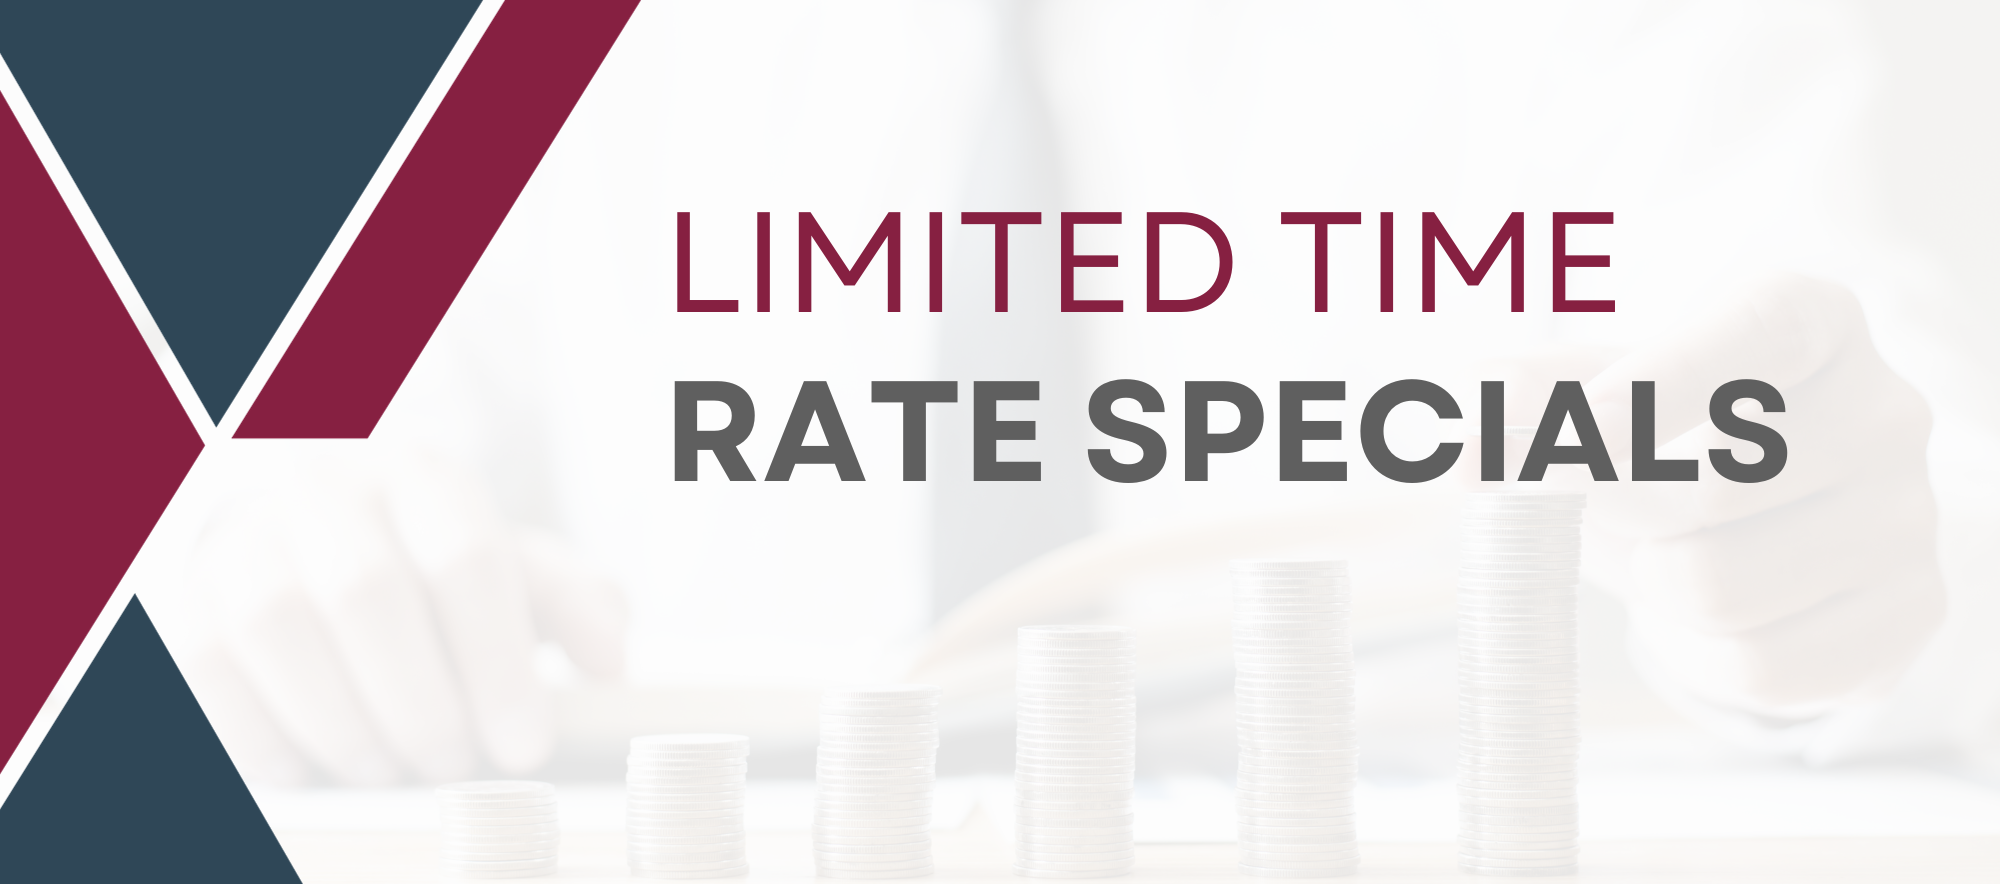 limited time rate specials text on background